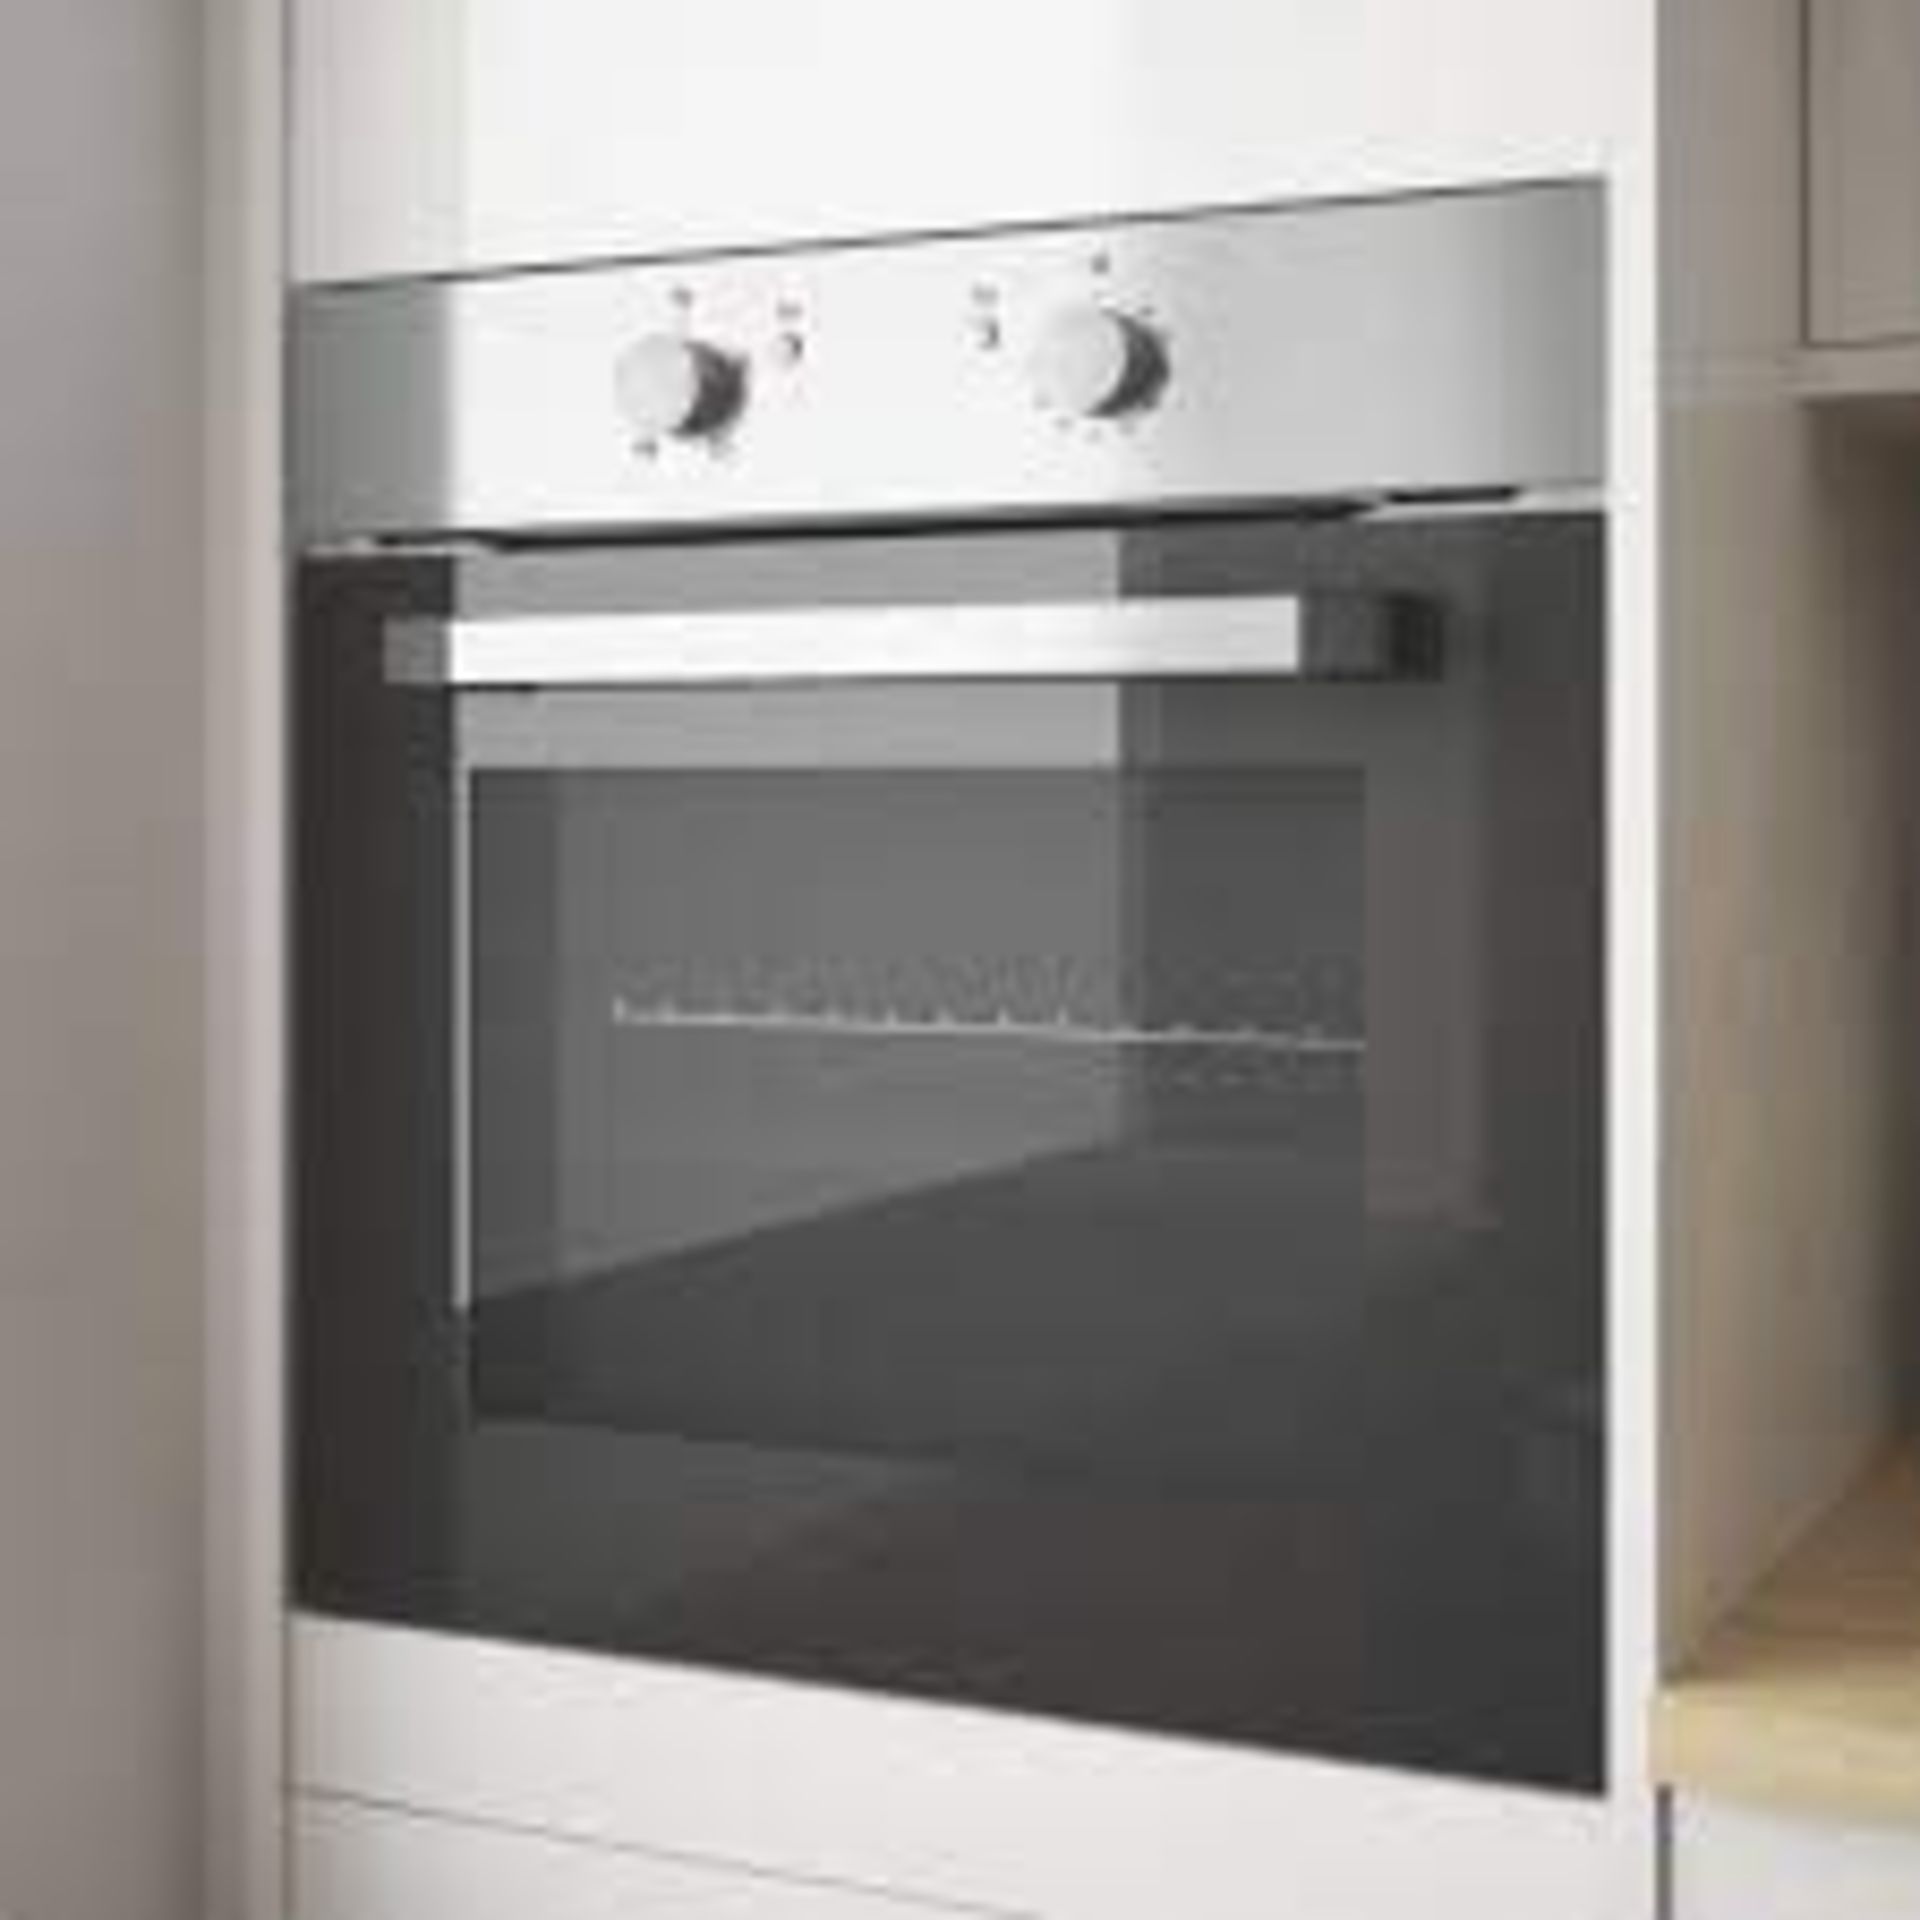 Cooke & Lewis CSB60A BUILT- IN SINGLE ELECTRIC OVEN STAINLESS STEEL 595 X 595MM. - BI. RRP £249.